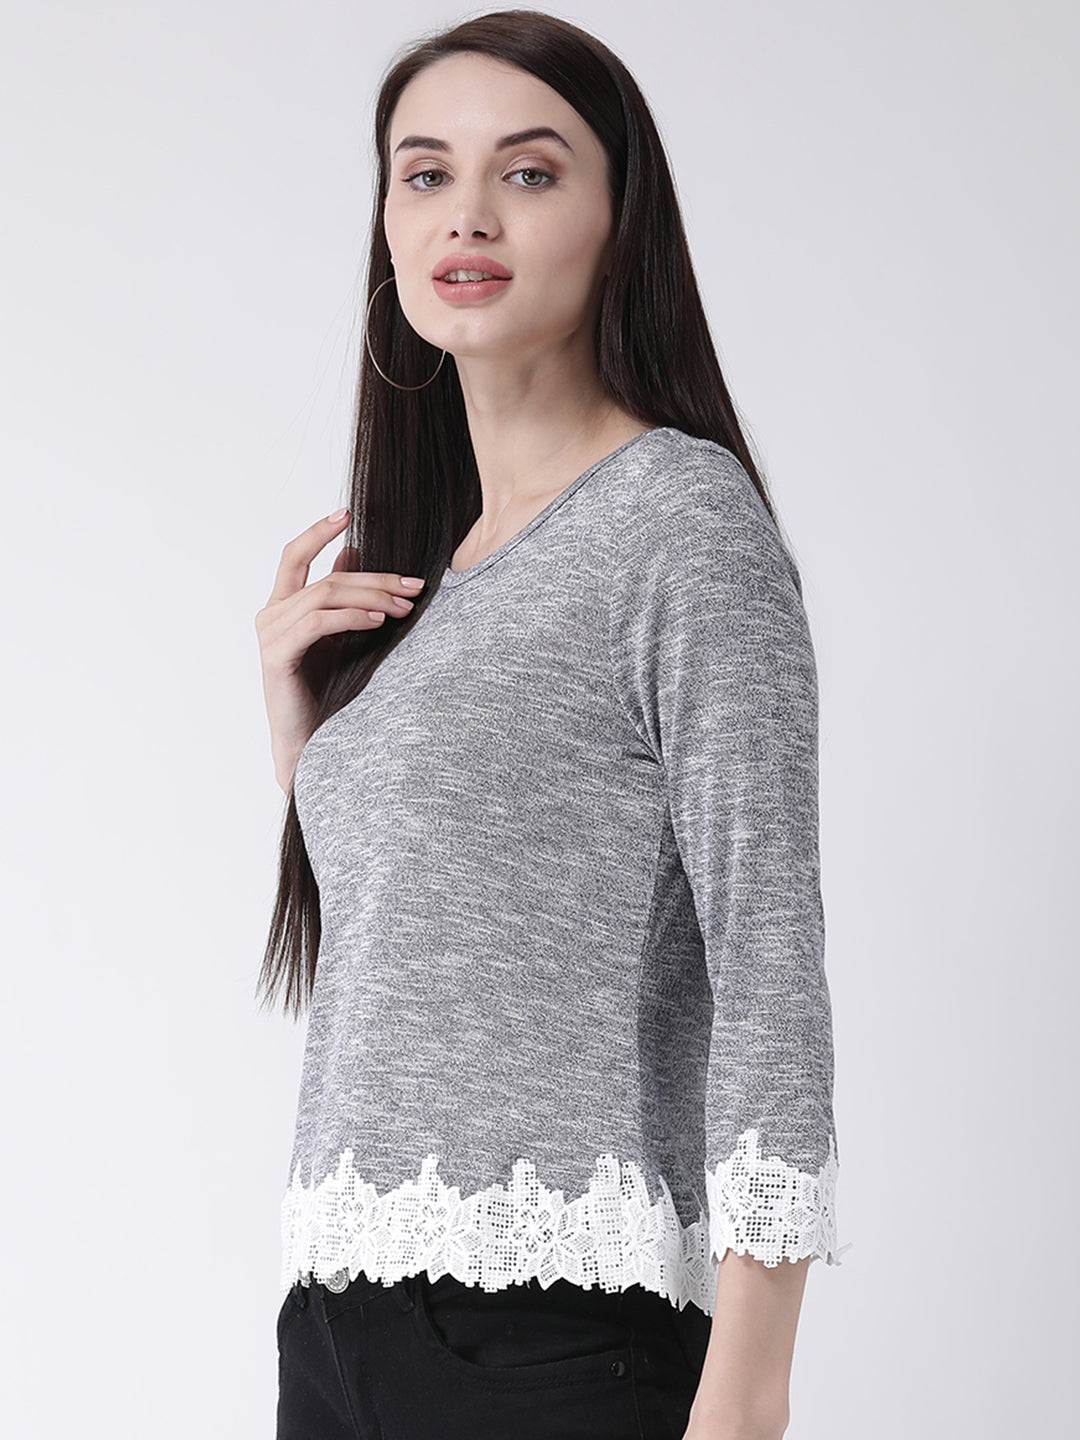 Blue 3/4 Sleeve T Shirt With Lace